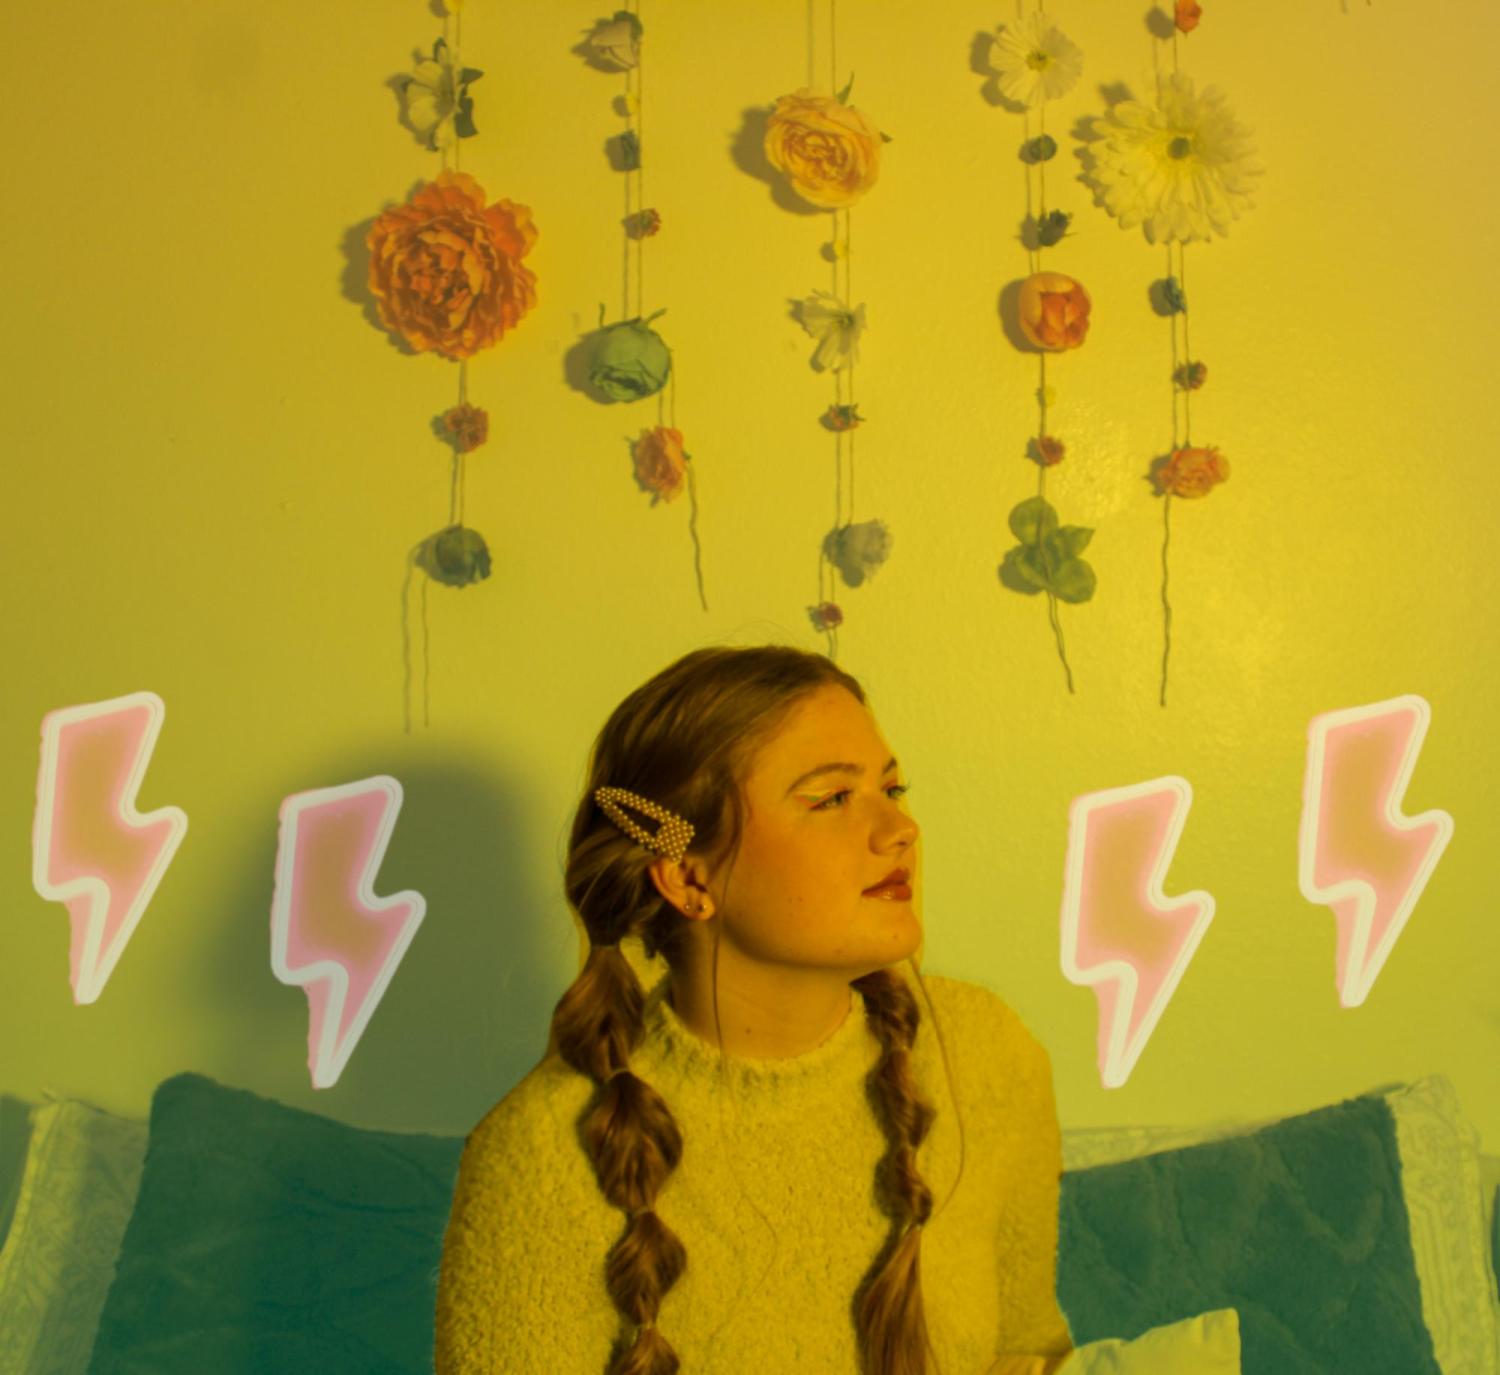 Woman with braided hair in a yellow and green room with hanging flowers